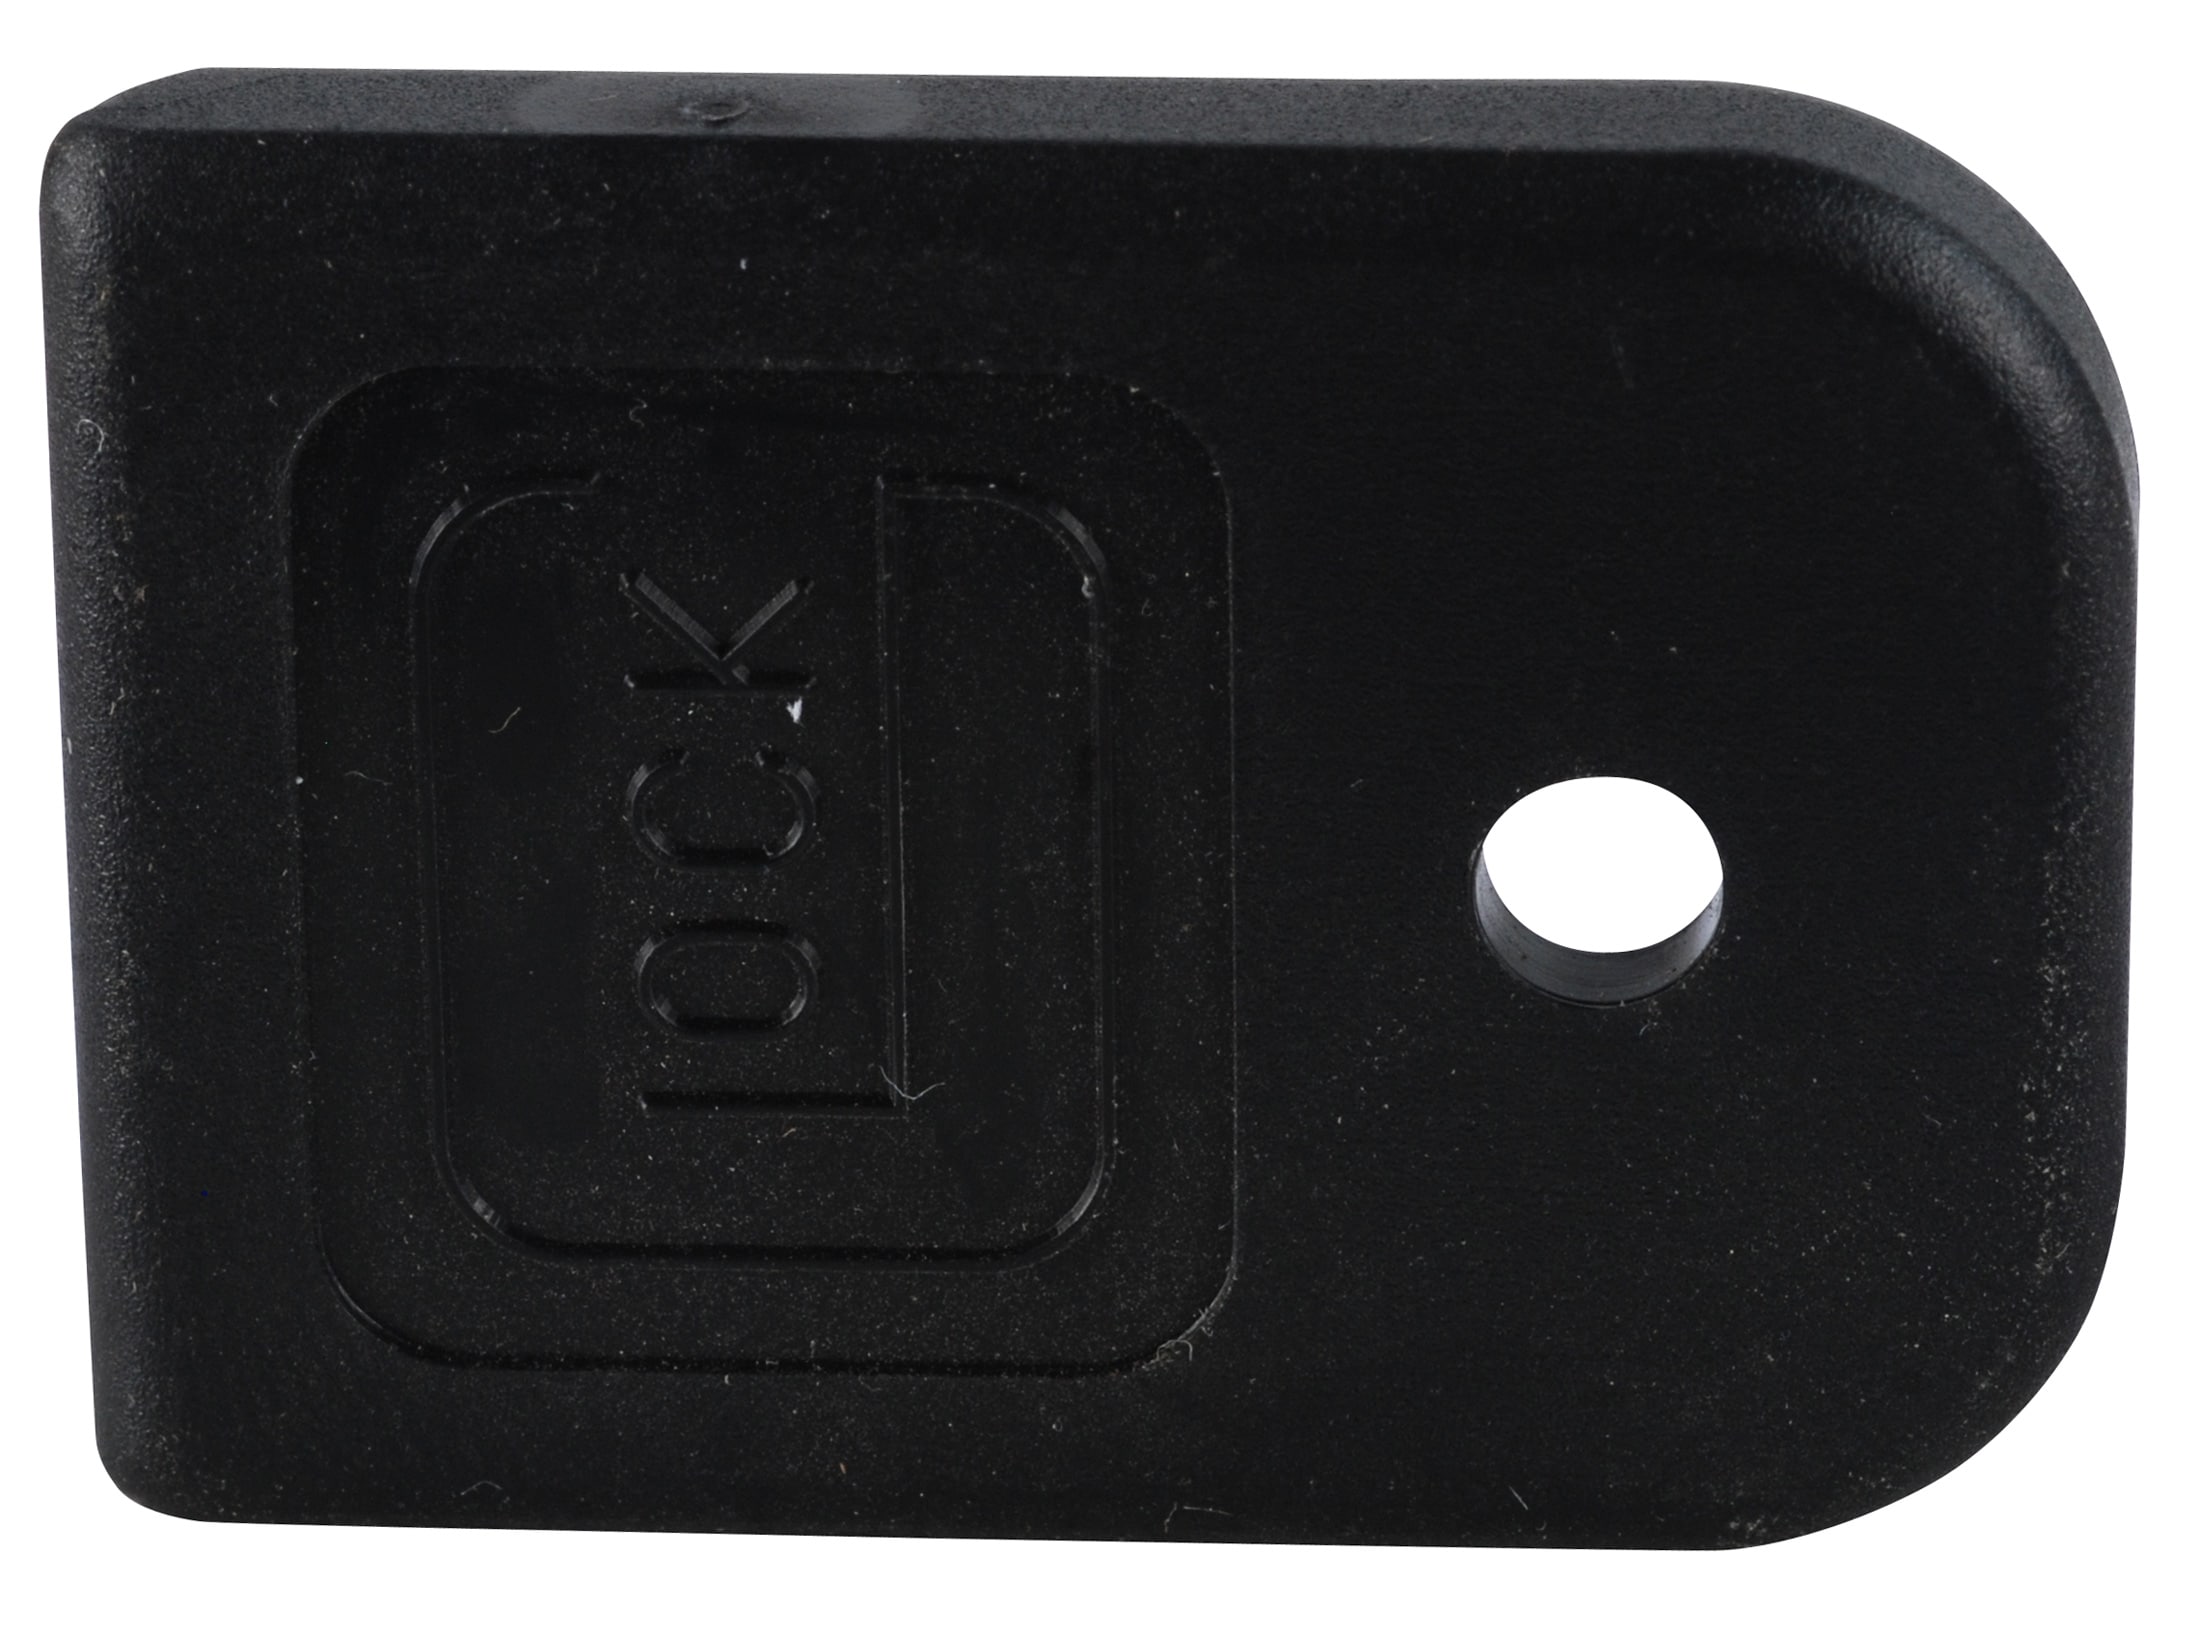 Tactical Magazine Extension Bottom Base Plate For Glock 17 22 23 24 26 27 31-35 